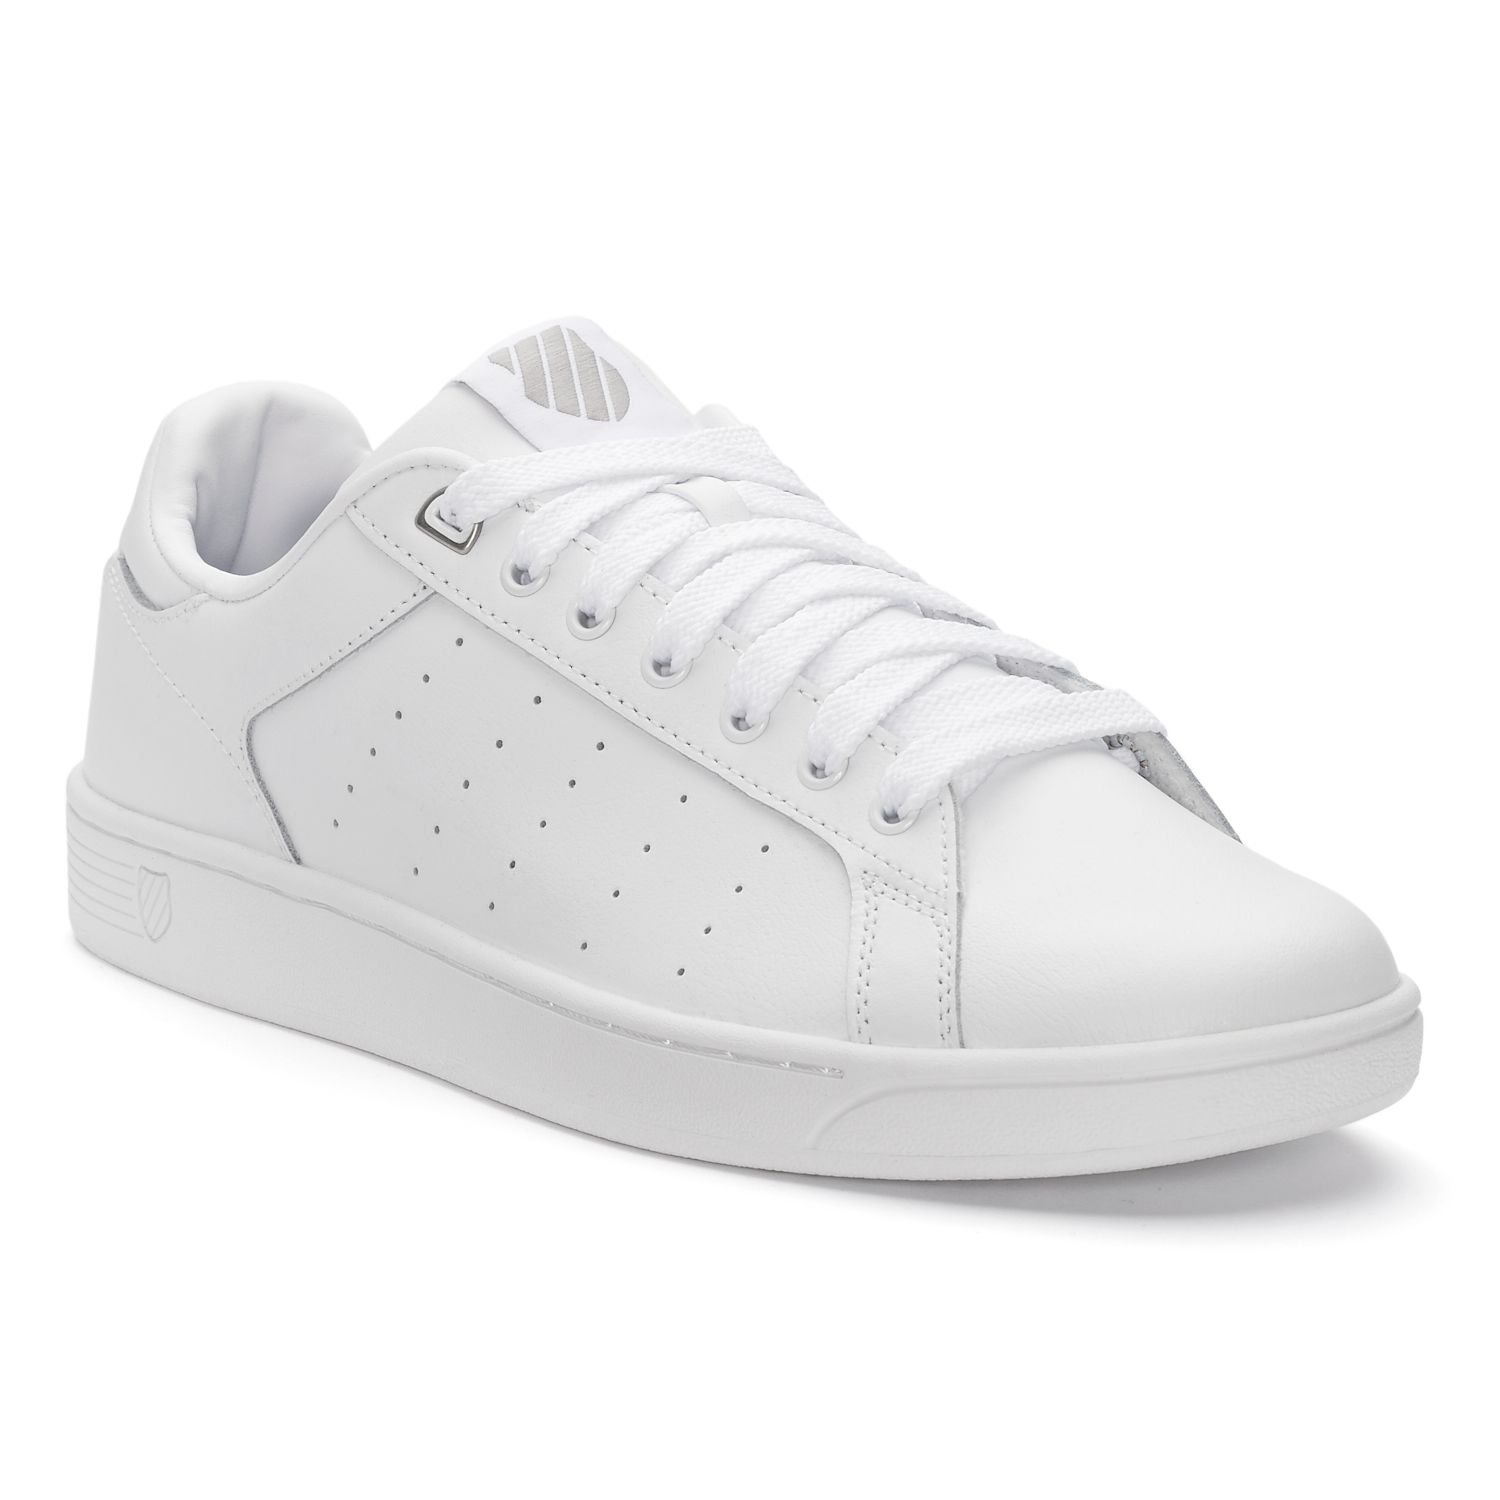 k swiss clean court cmf review